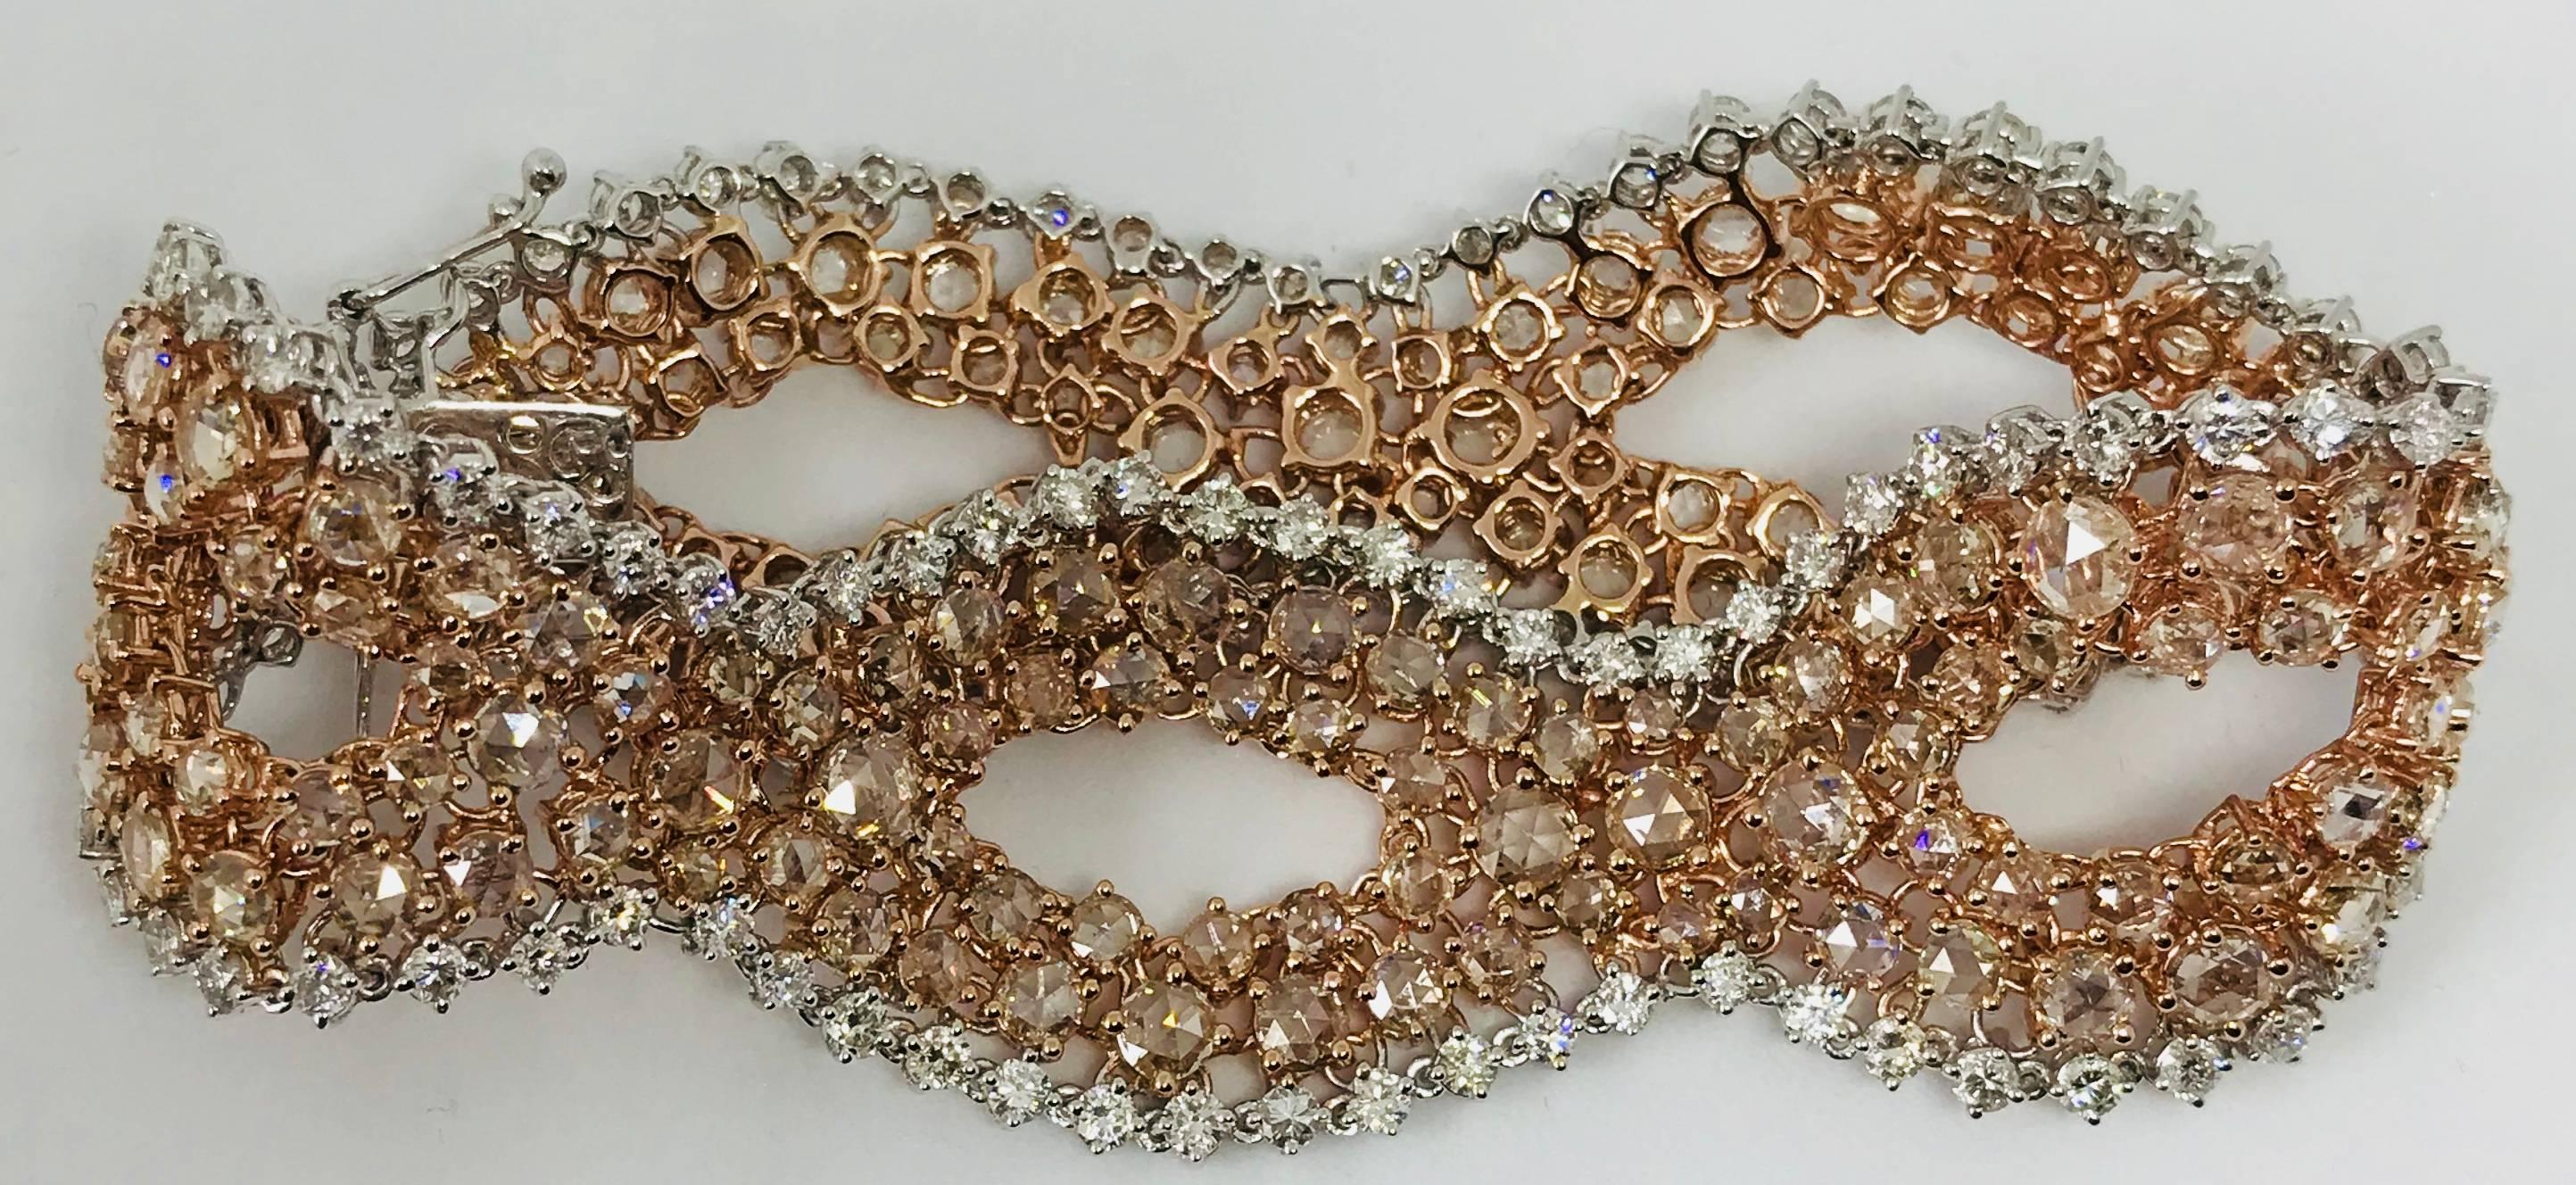 Rose Cut Diamond Twisted Bracelet In 18k White and Rose Gold with White and Pink Diamonds For Sale